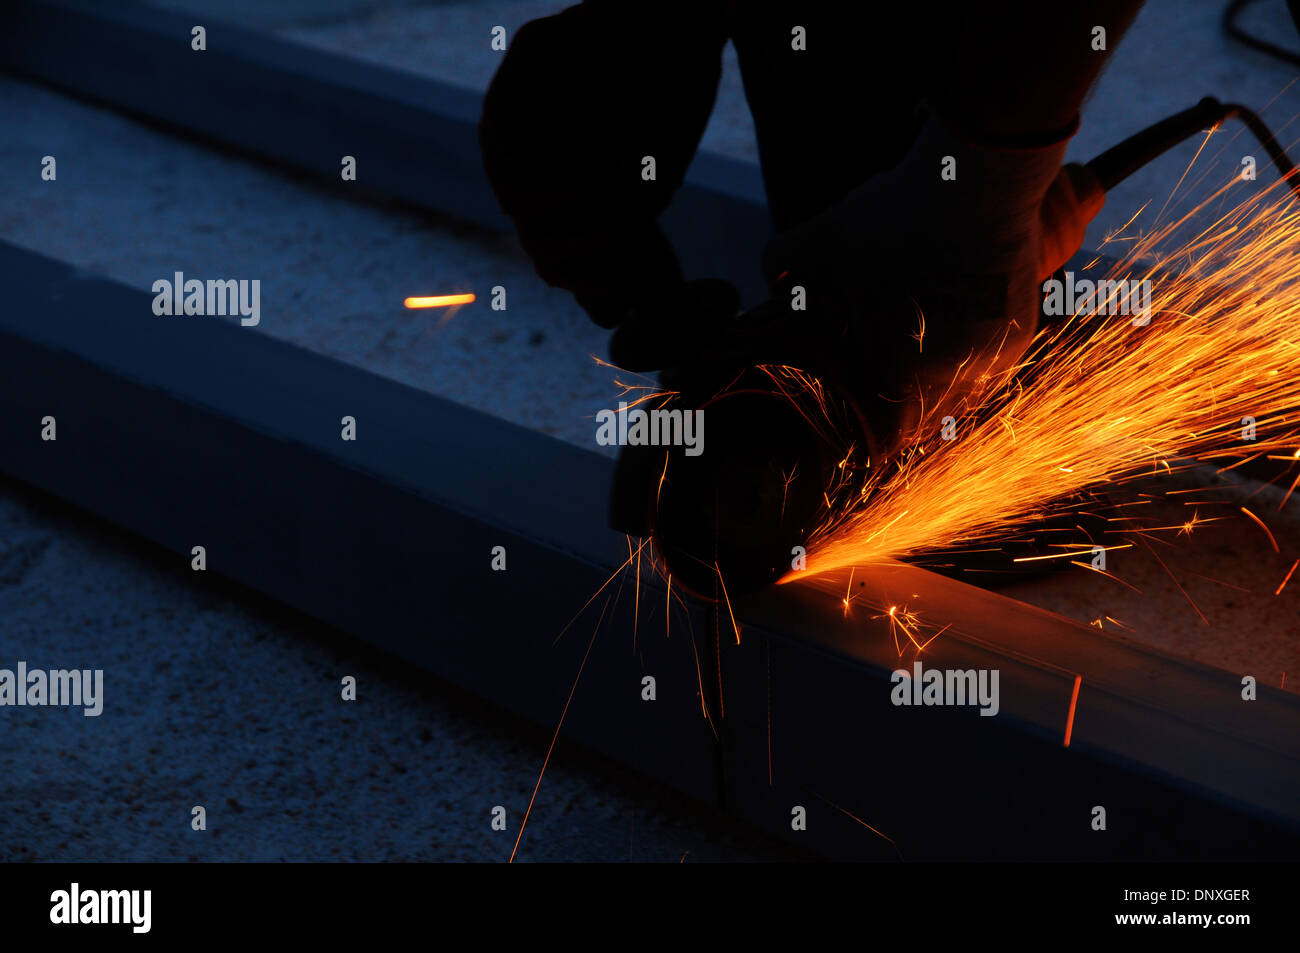 Cutting metal with grinder. Stock Photo